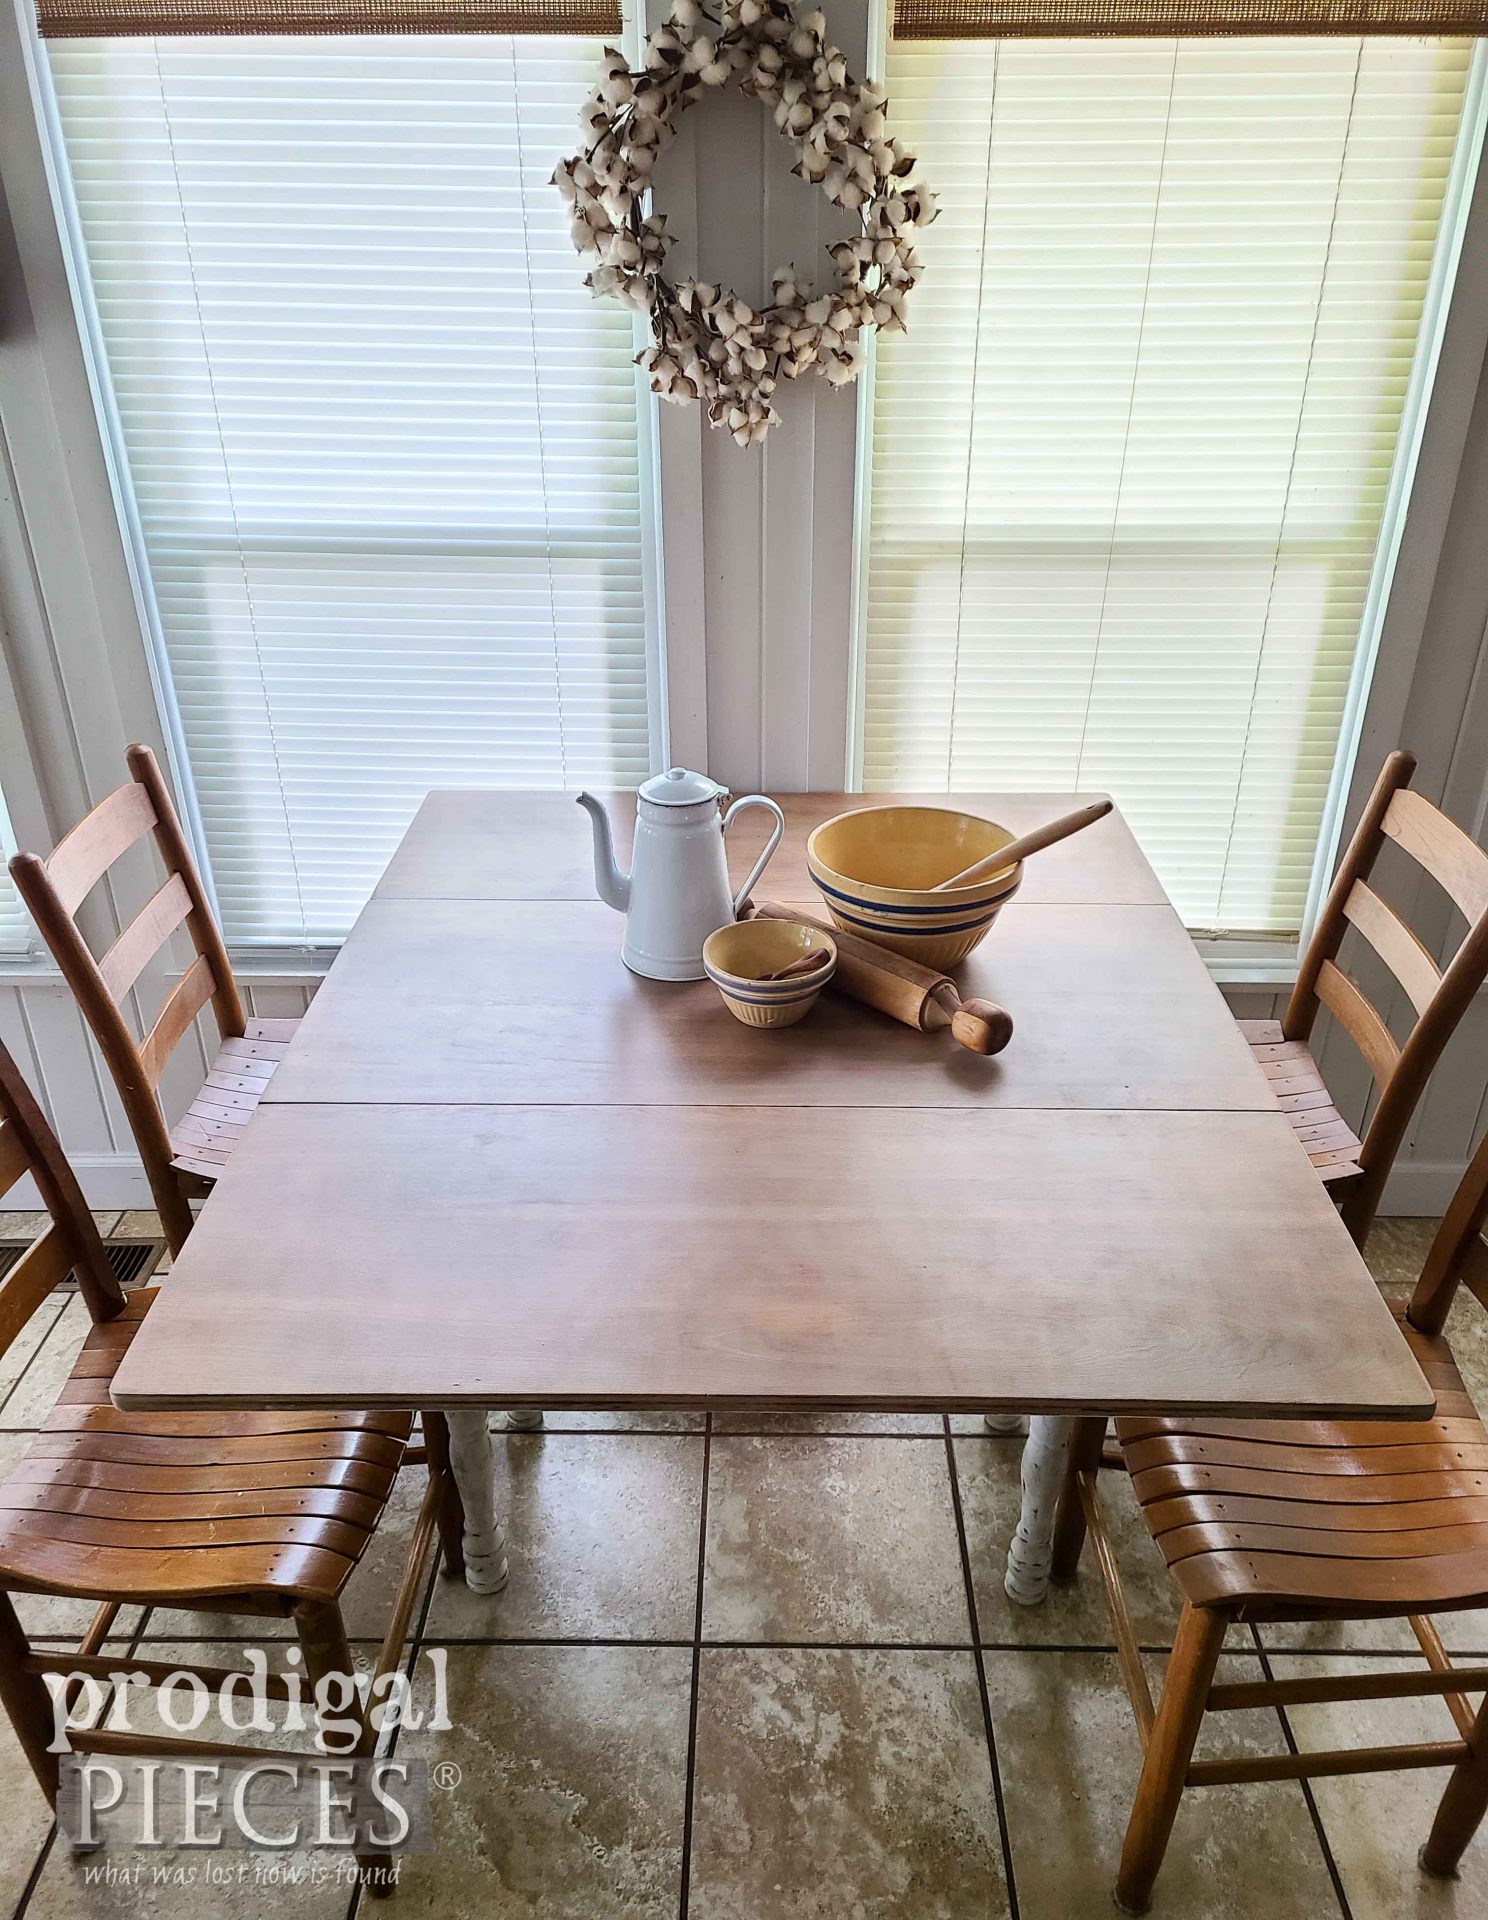 Open Drop-Leaf Dining Table Top by Larissa of Prodigal Pieces | prodigalpieces.com #prodigalpieces #homedecor #diy #furniture